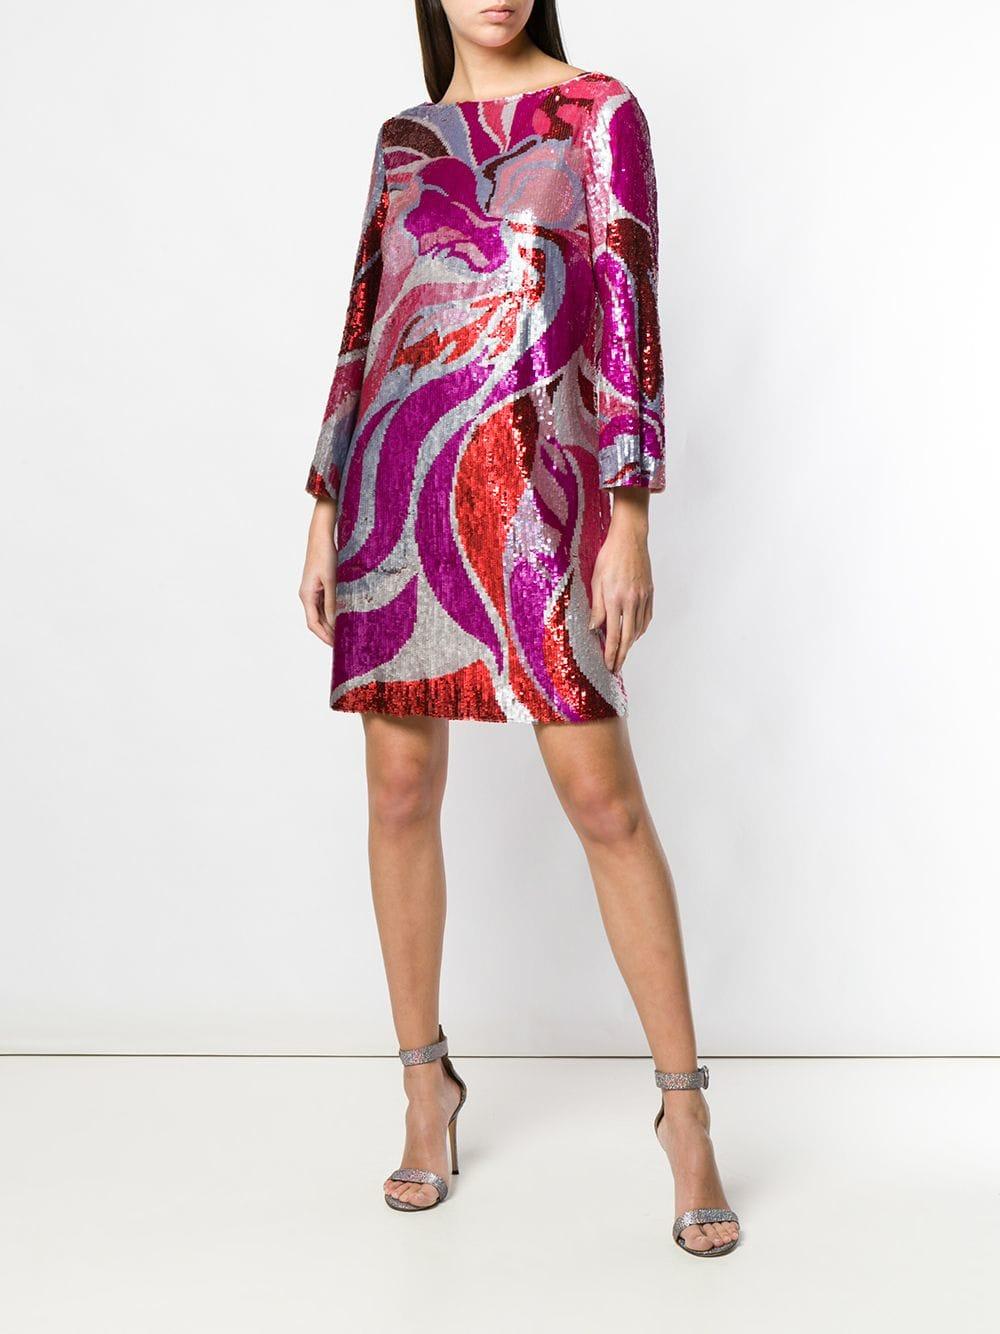 Emilio Pucci Synthetic Sequin Embroidered Long Sleeve Dress in 